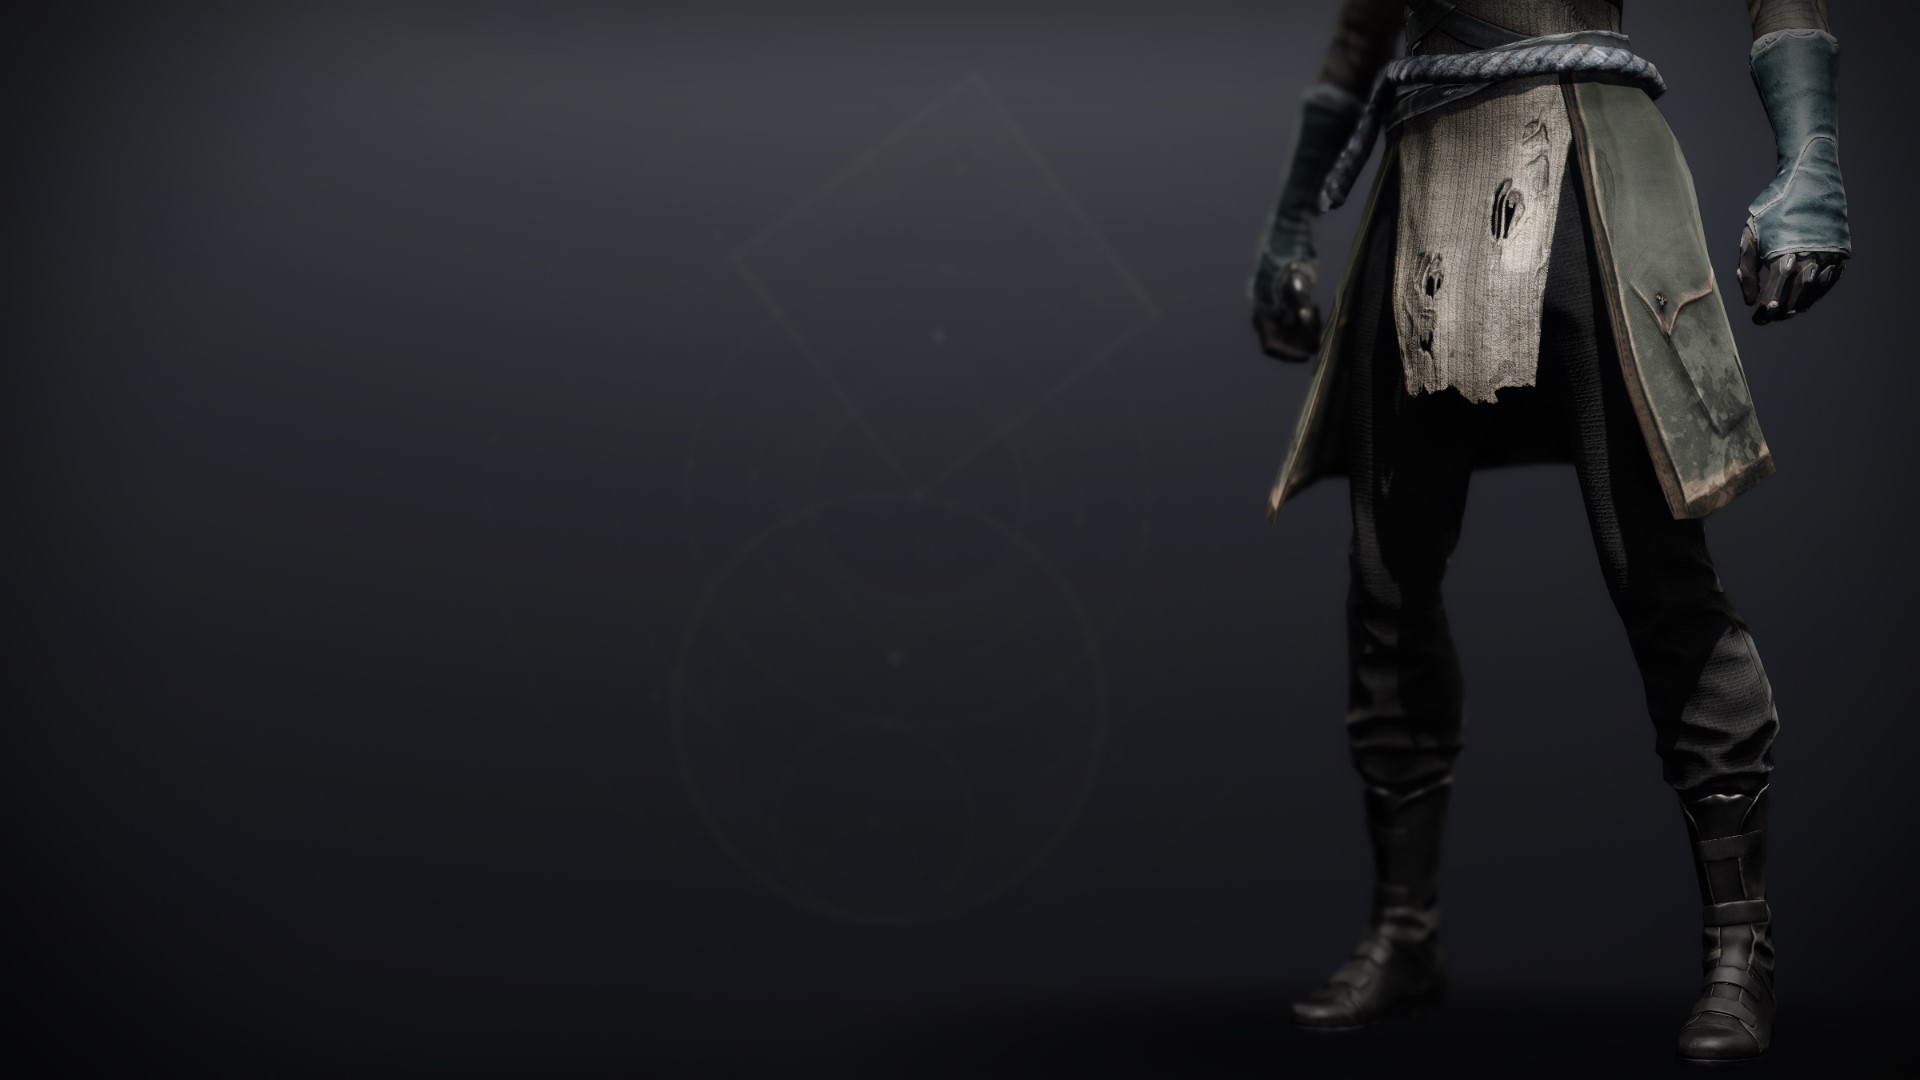 An in-game render of the Calamity Rig Boots.